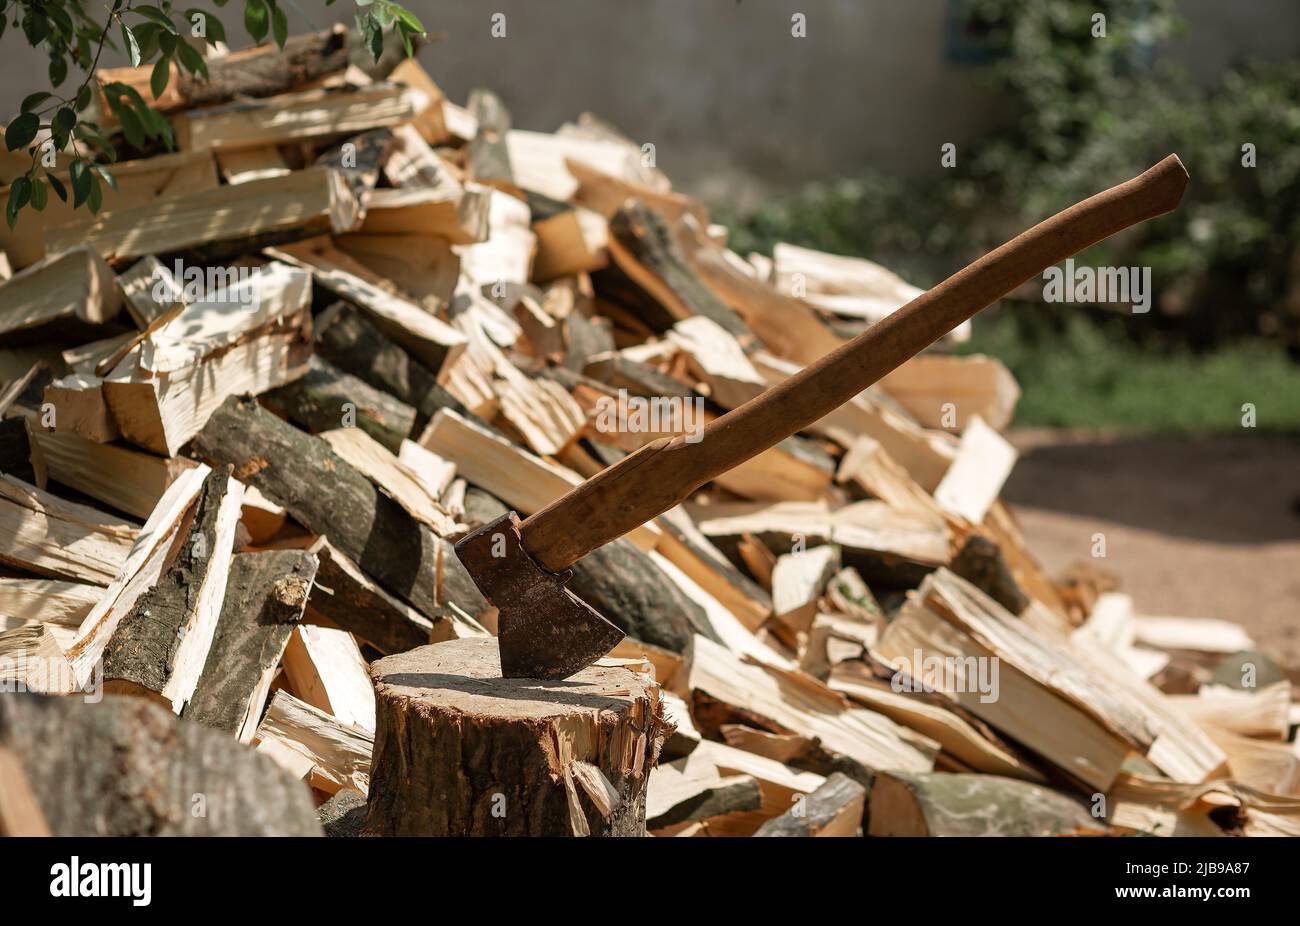 Ax on the background of chopped firewood for kindling the stove Stock Photo